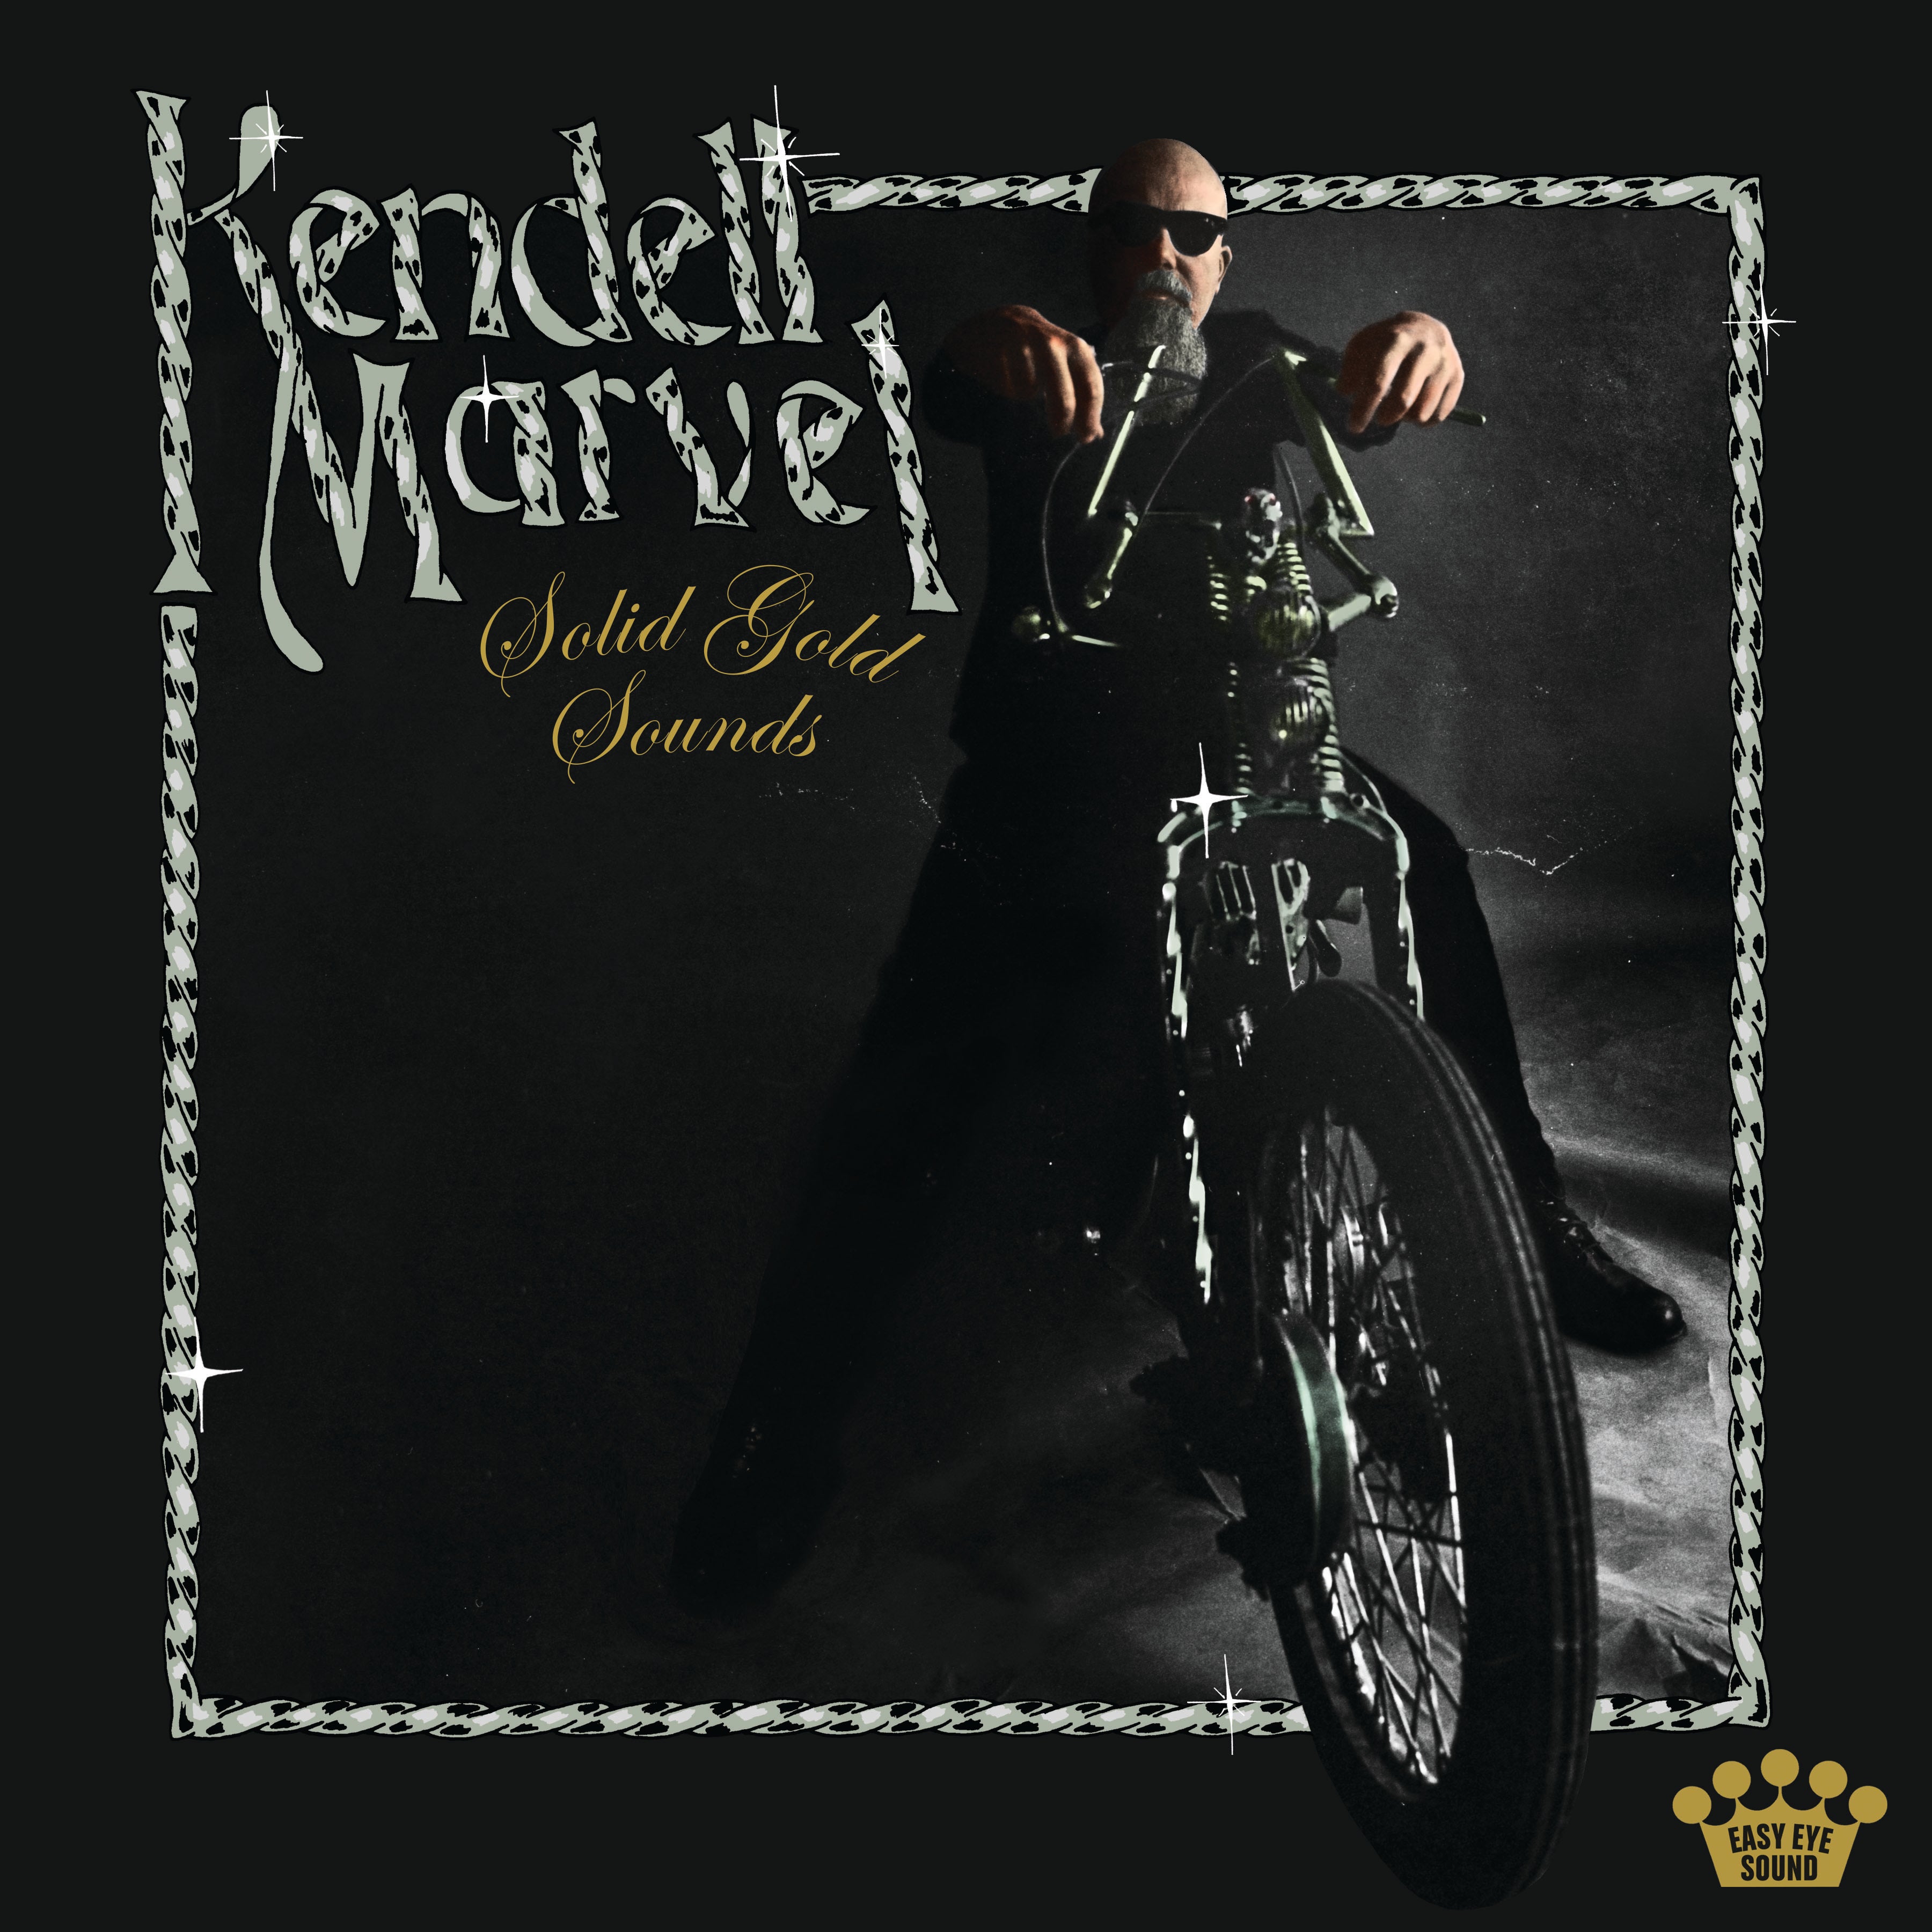 KENDELL MARVEL’S NEW ALBUM “SOLID GOLD SOUNDS” DUE OCTOBER 11 ON EASY EYE SOUND